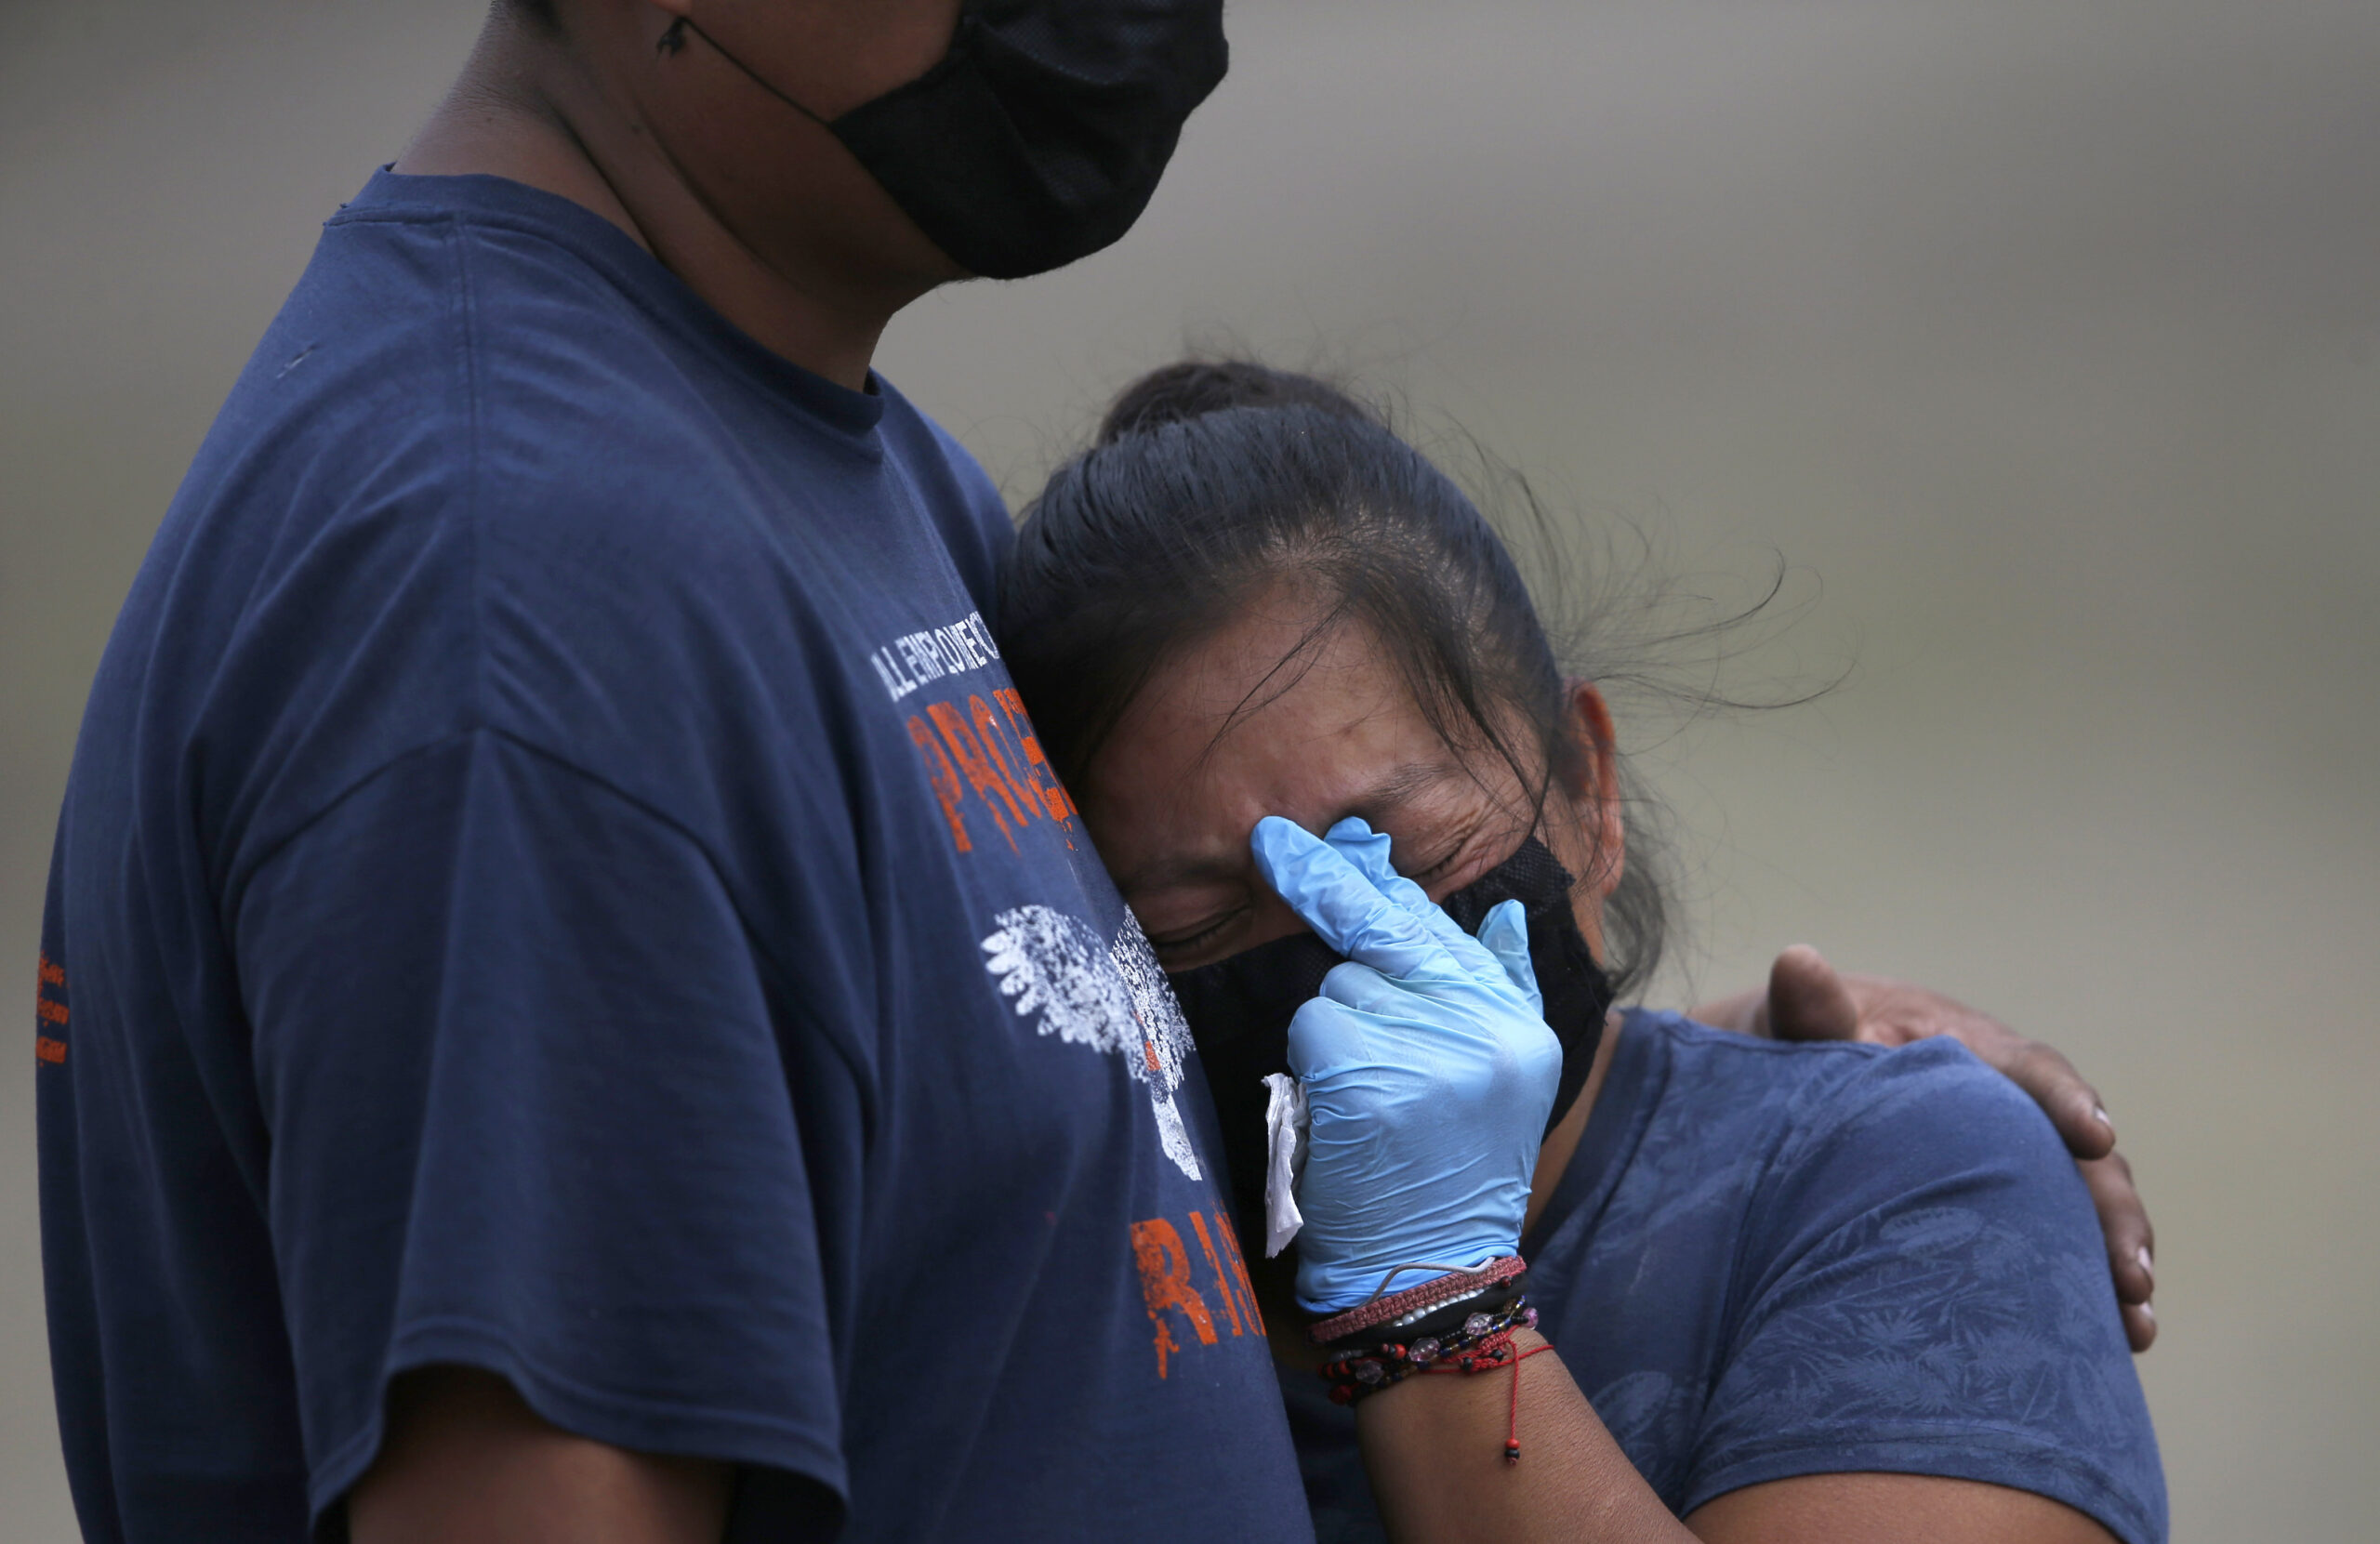 A couple mourns during the burial of their loved one at the newly constructed Valle de Chalco Municipal Cemetery, built to accommodate the rise in deaths amid the pandemic, on the outskirts of Mexico City, May 2020